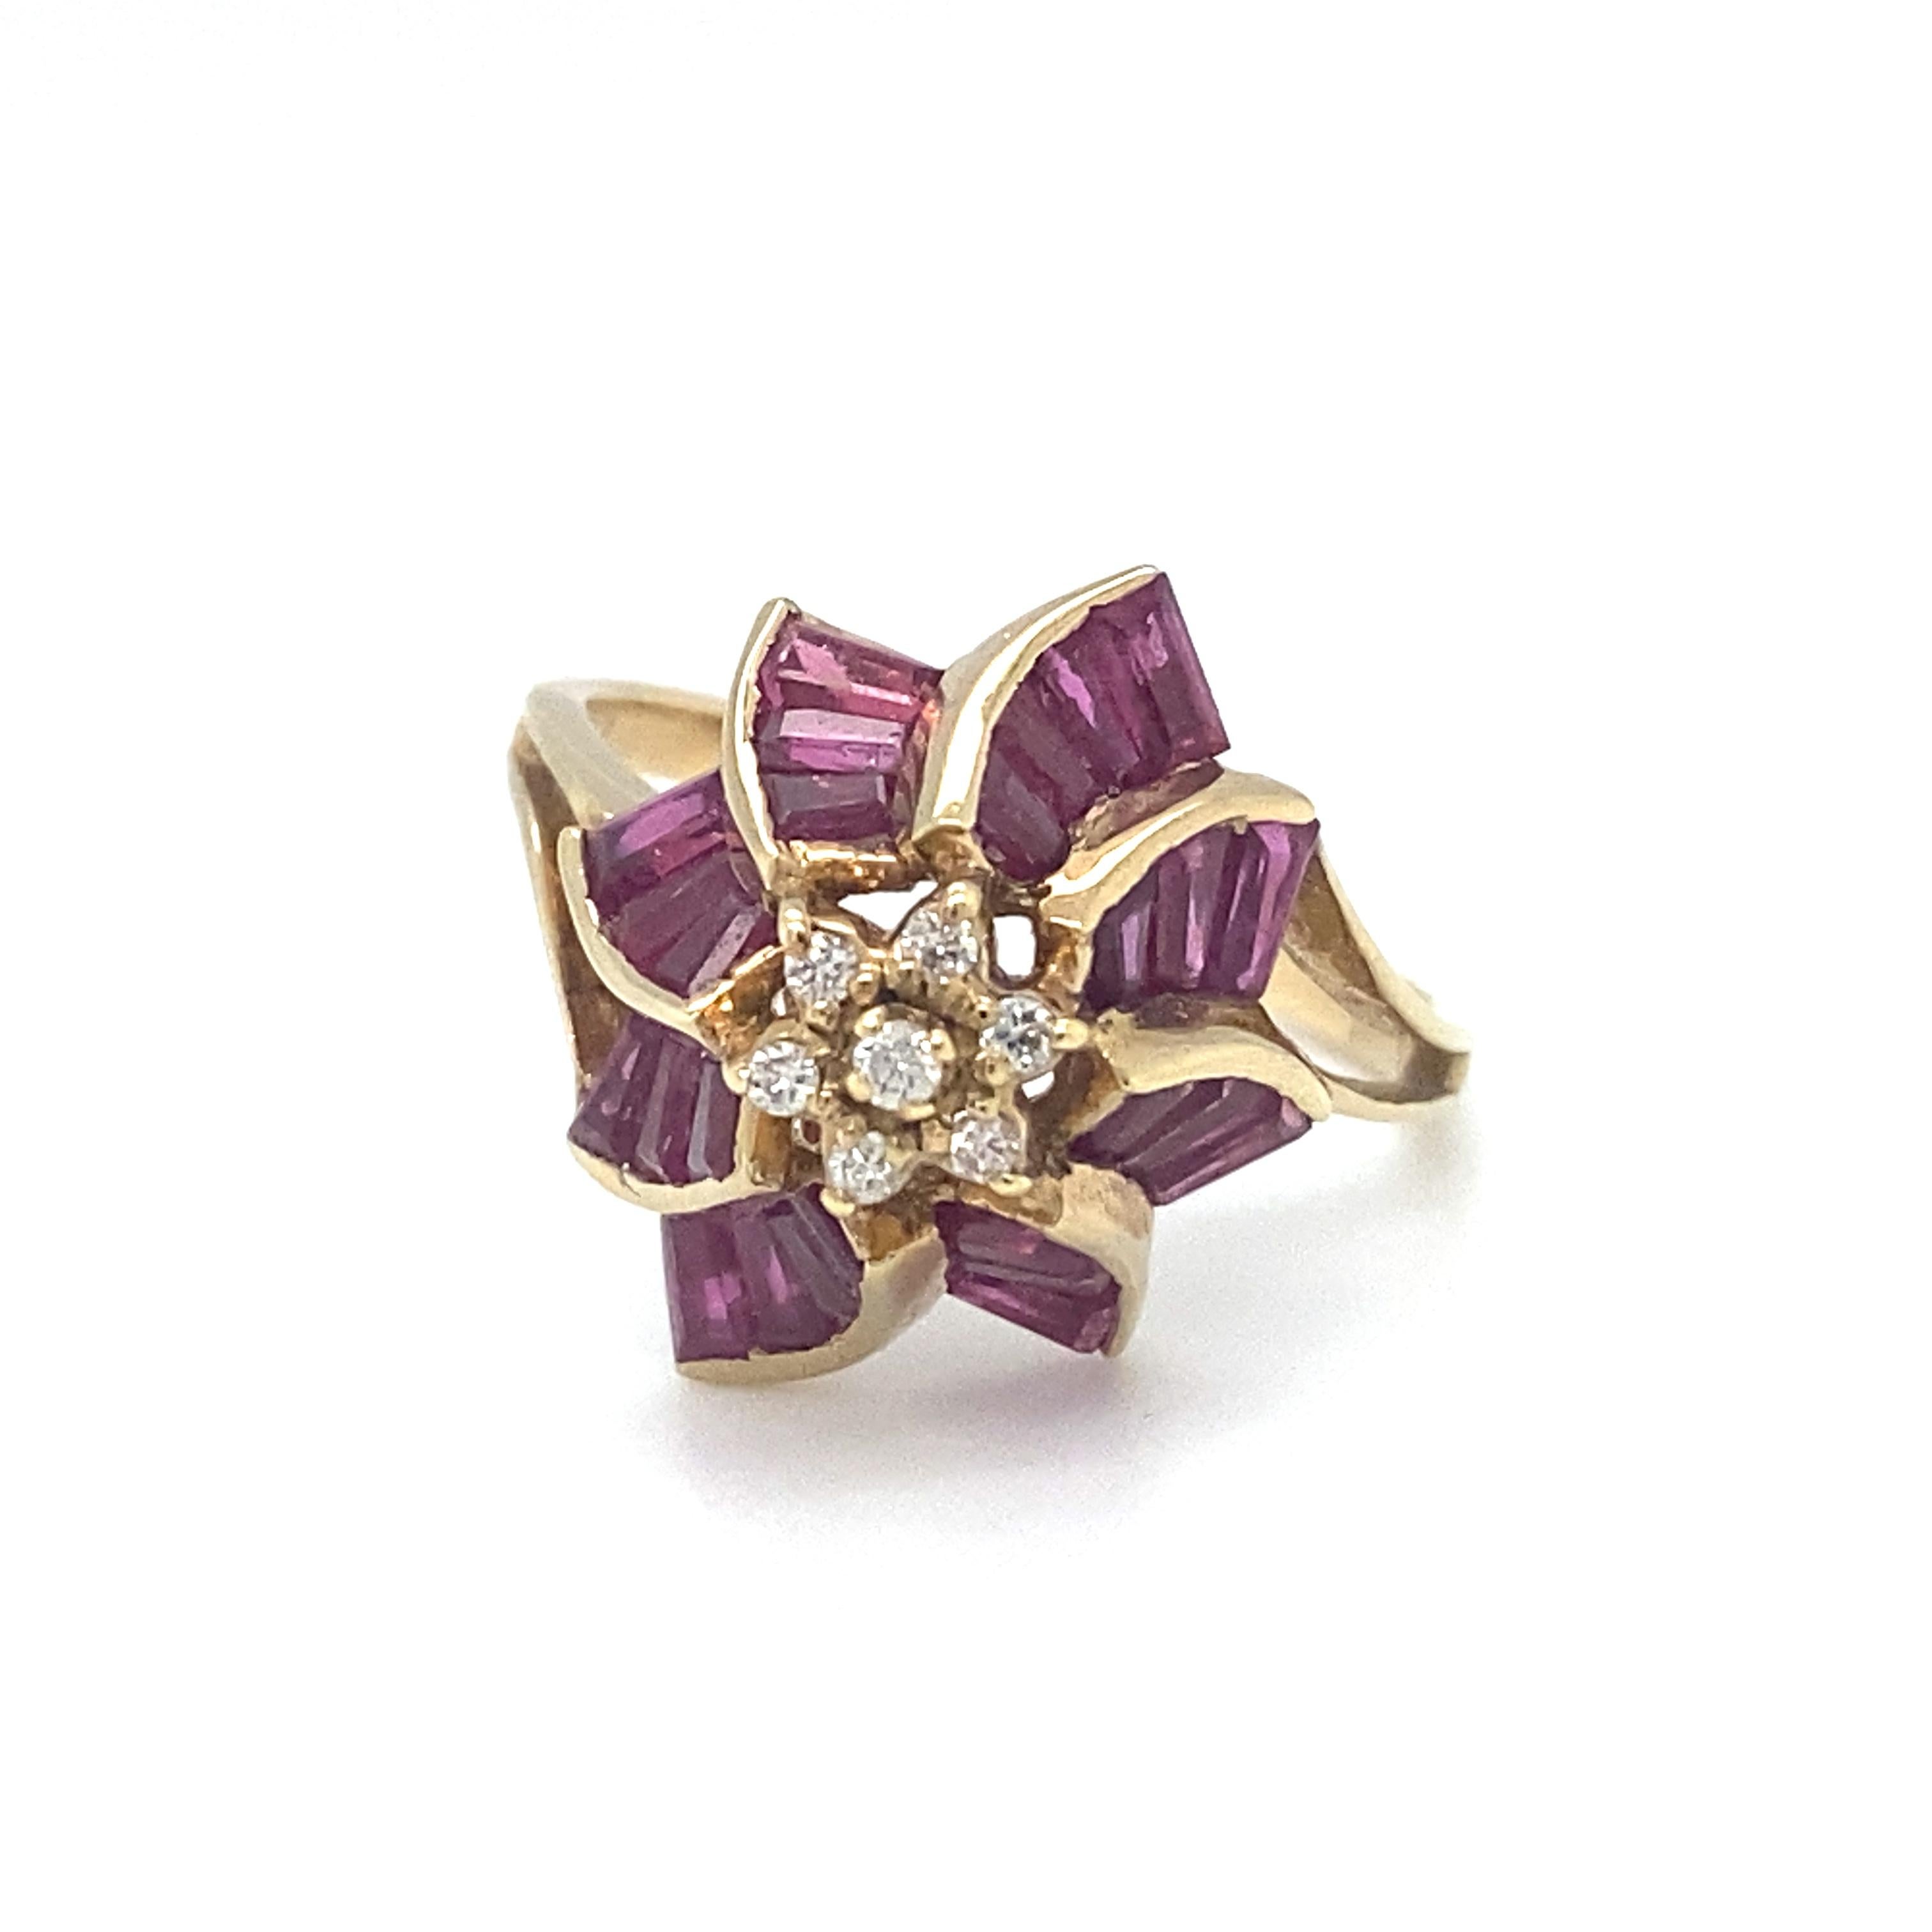 Women's or Men's Circa 1980s Ruby and Diamond Floral Motif Ring in 14K Gold